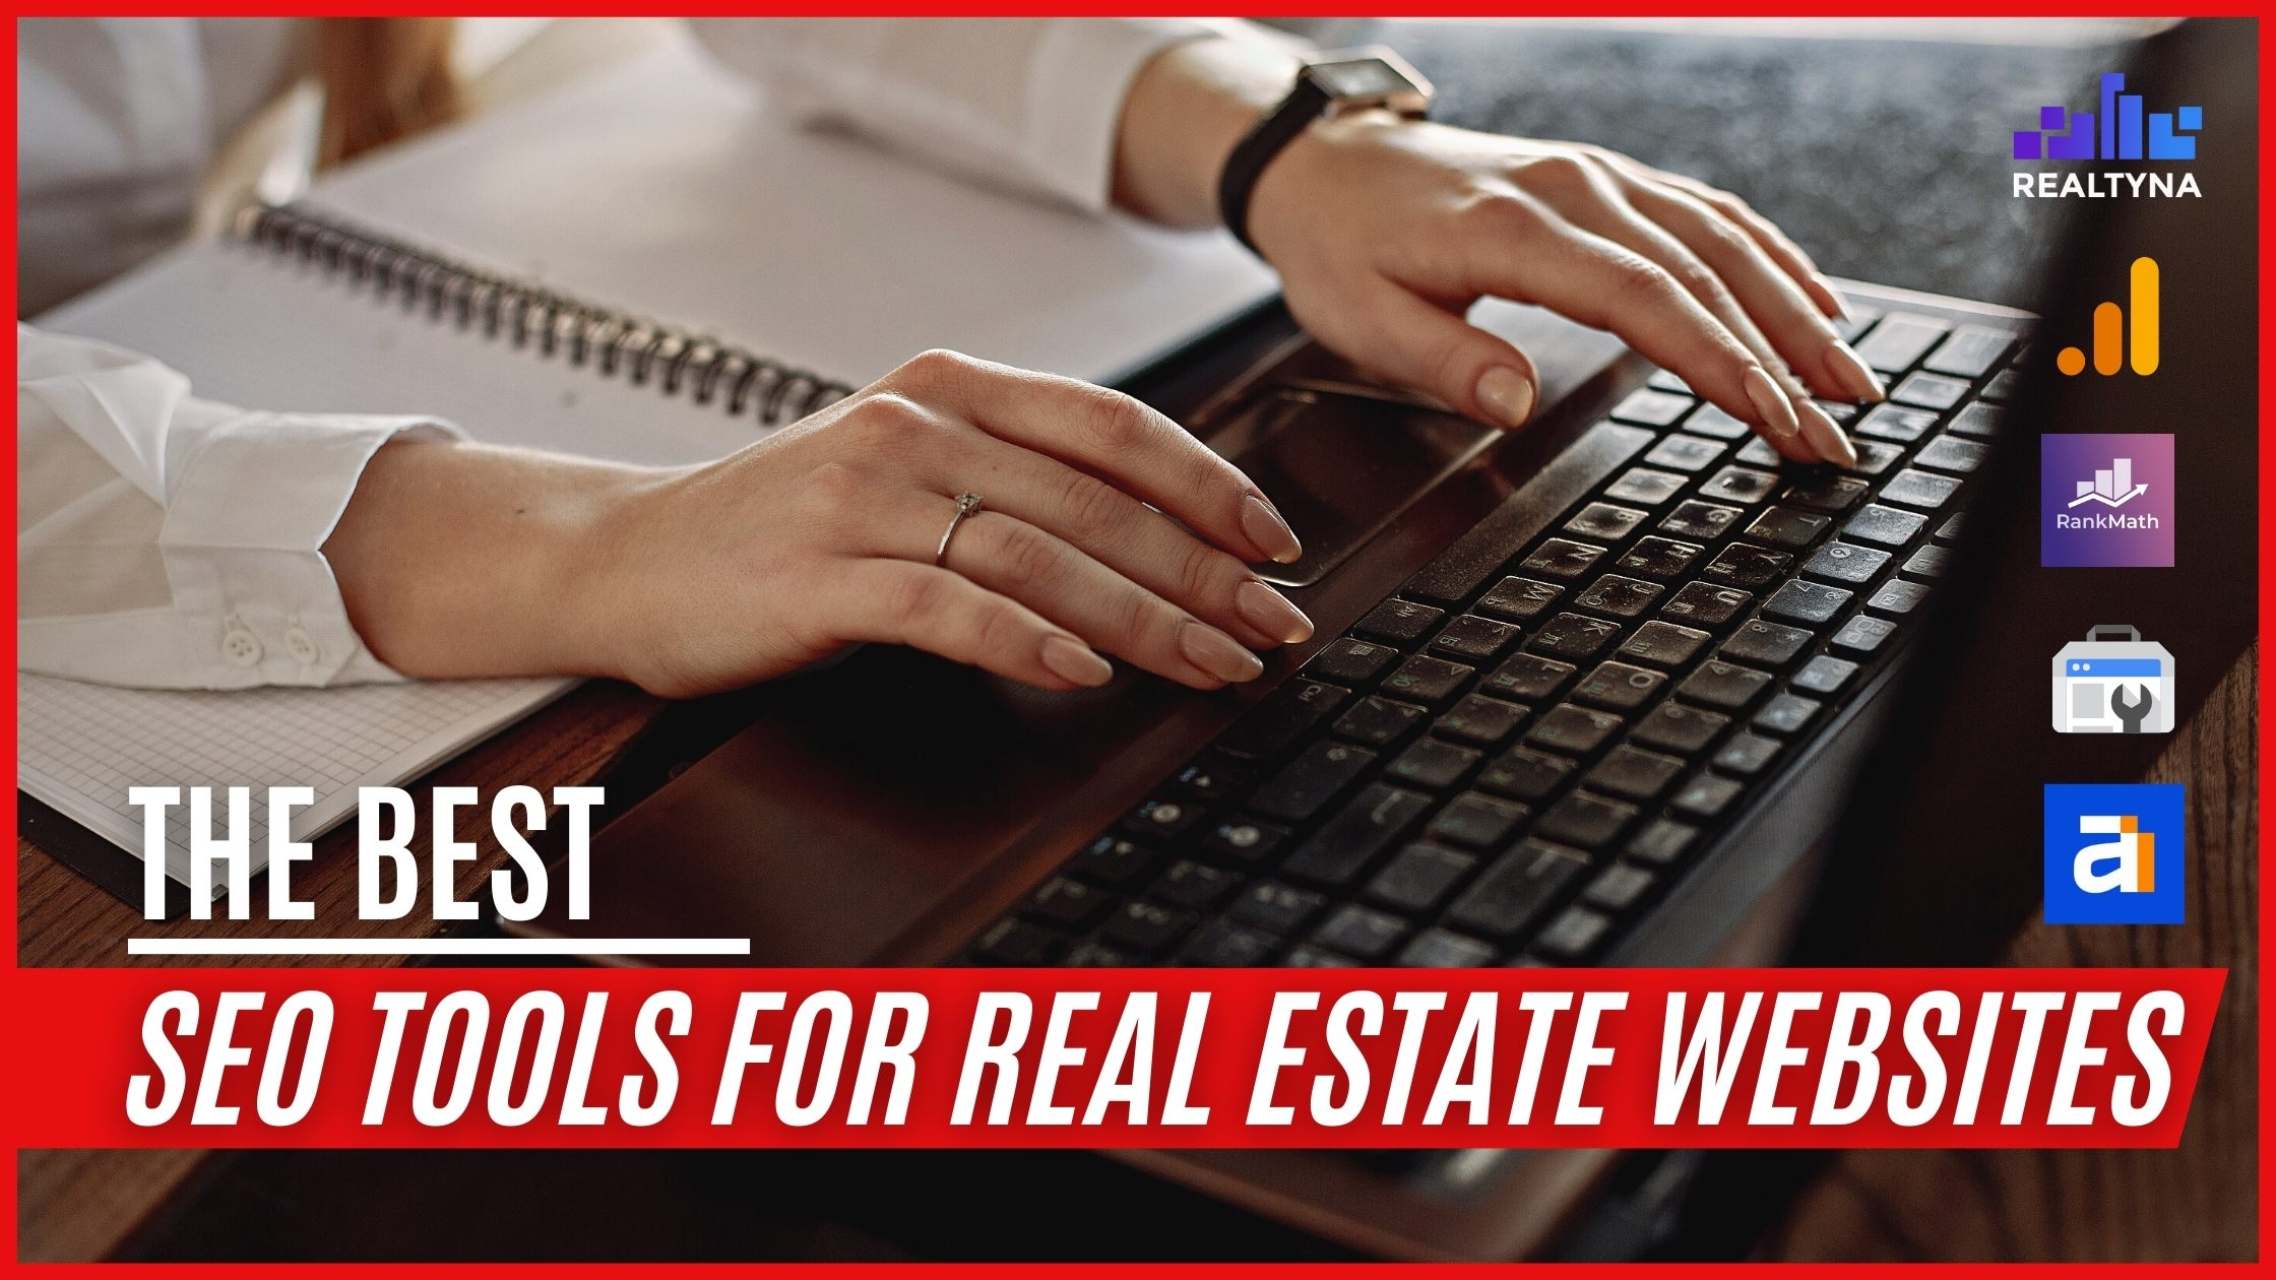 The Best SEO Tools for Real Estate websites